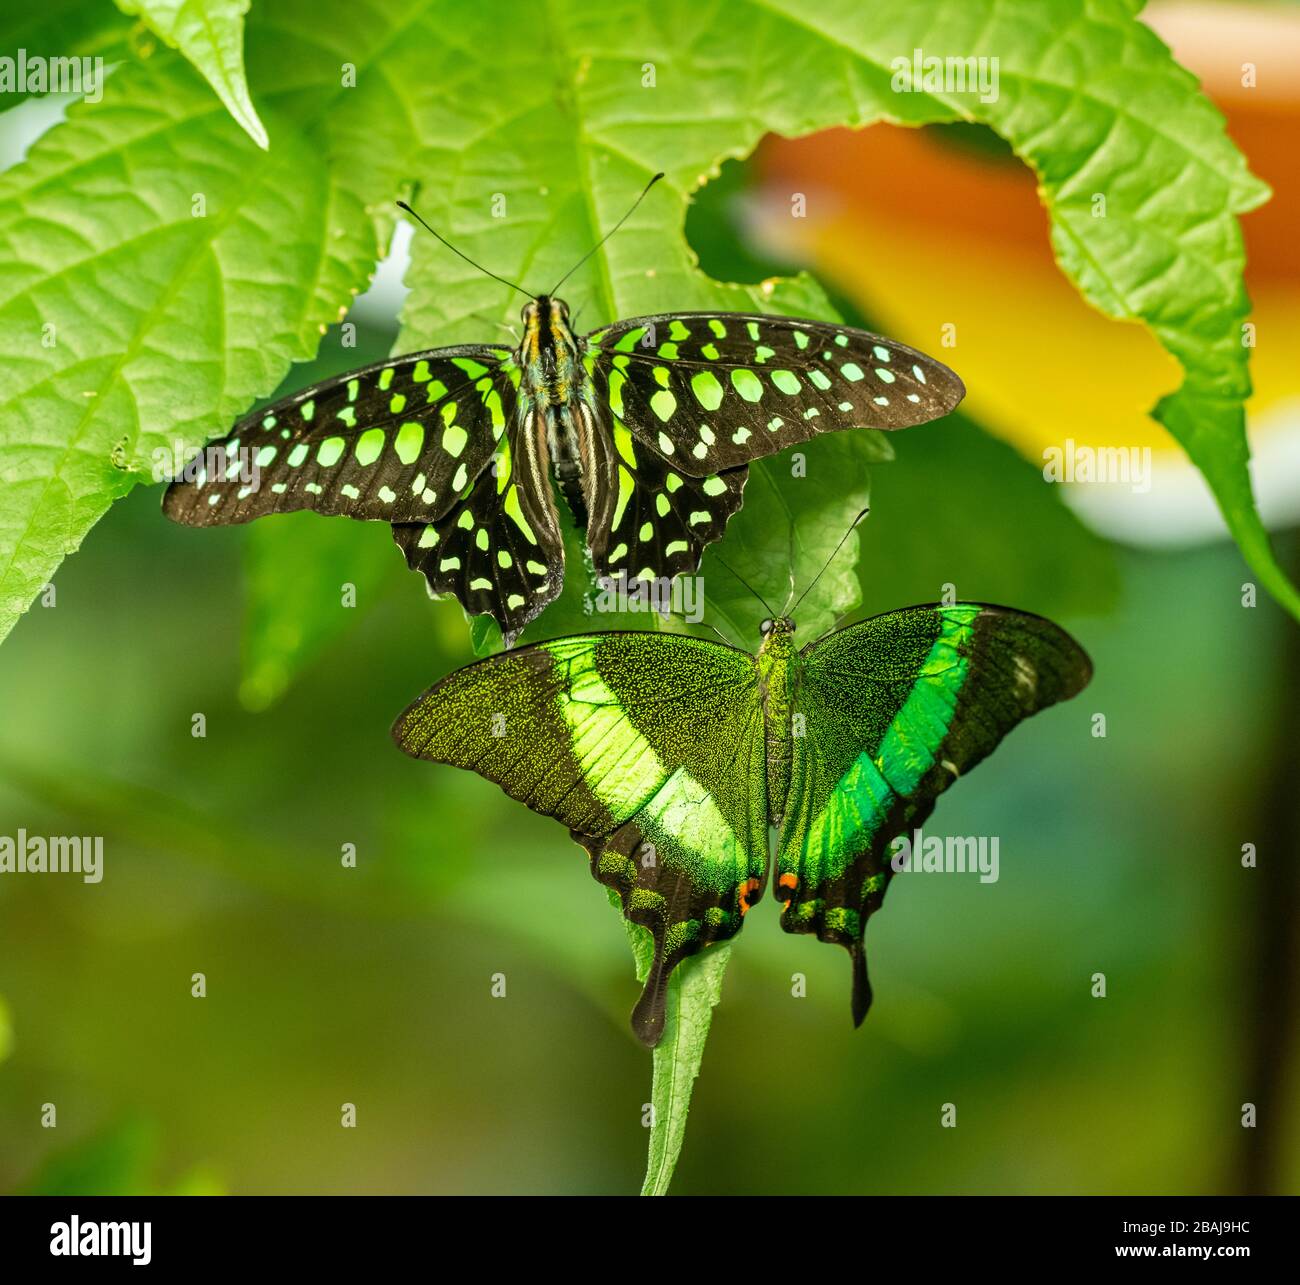 two tropical butterflies Emerald Swallowtail (Papilio palinurus) and Tailed Jay (Graphium agamemnon) sitting next to each other on leaf, animal insect Stock Photo